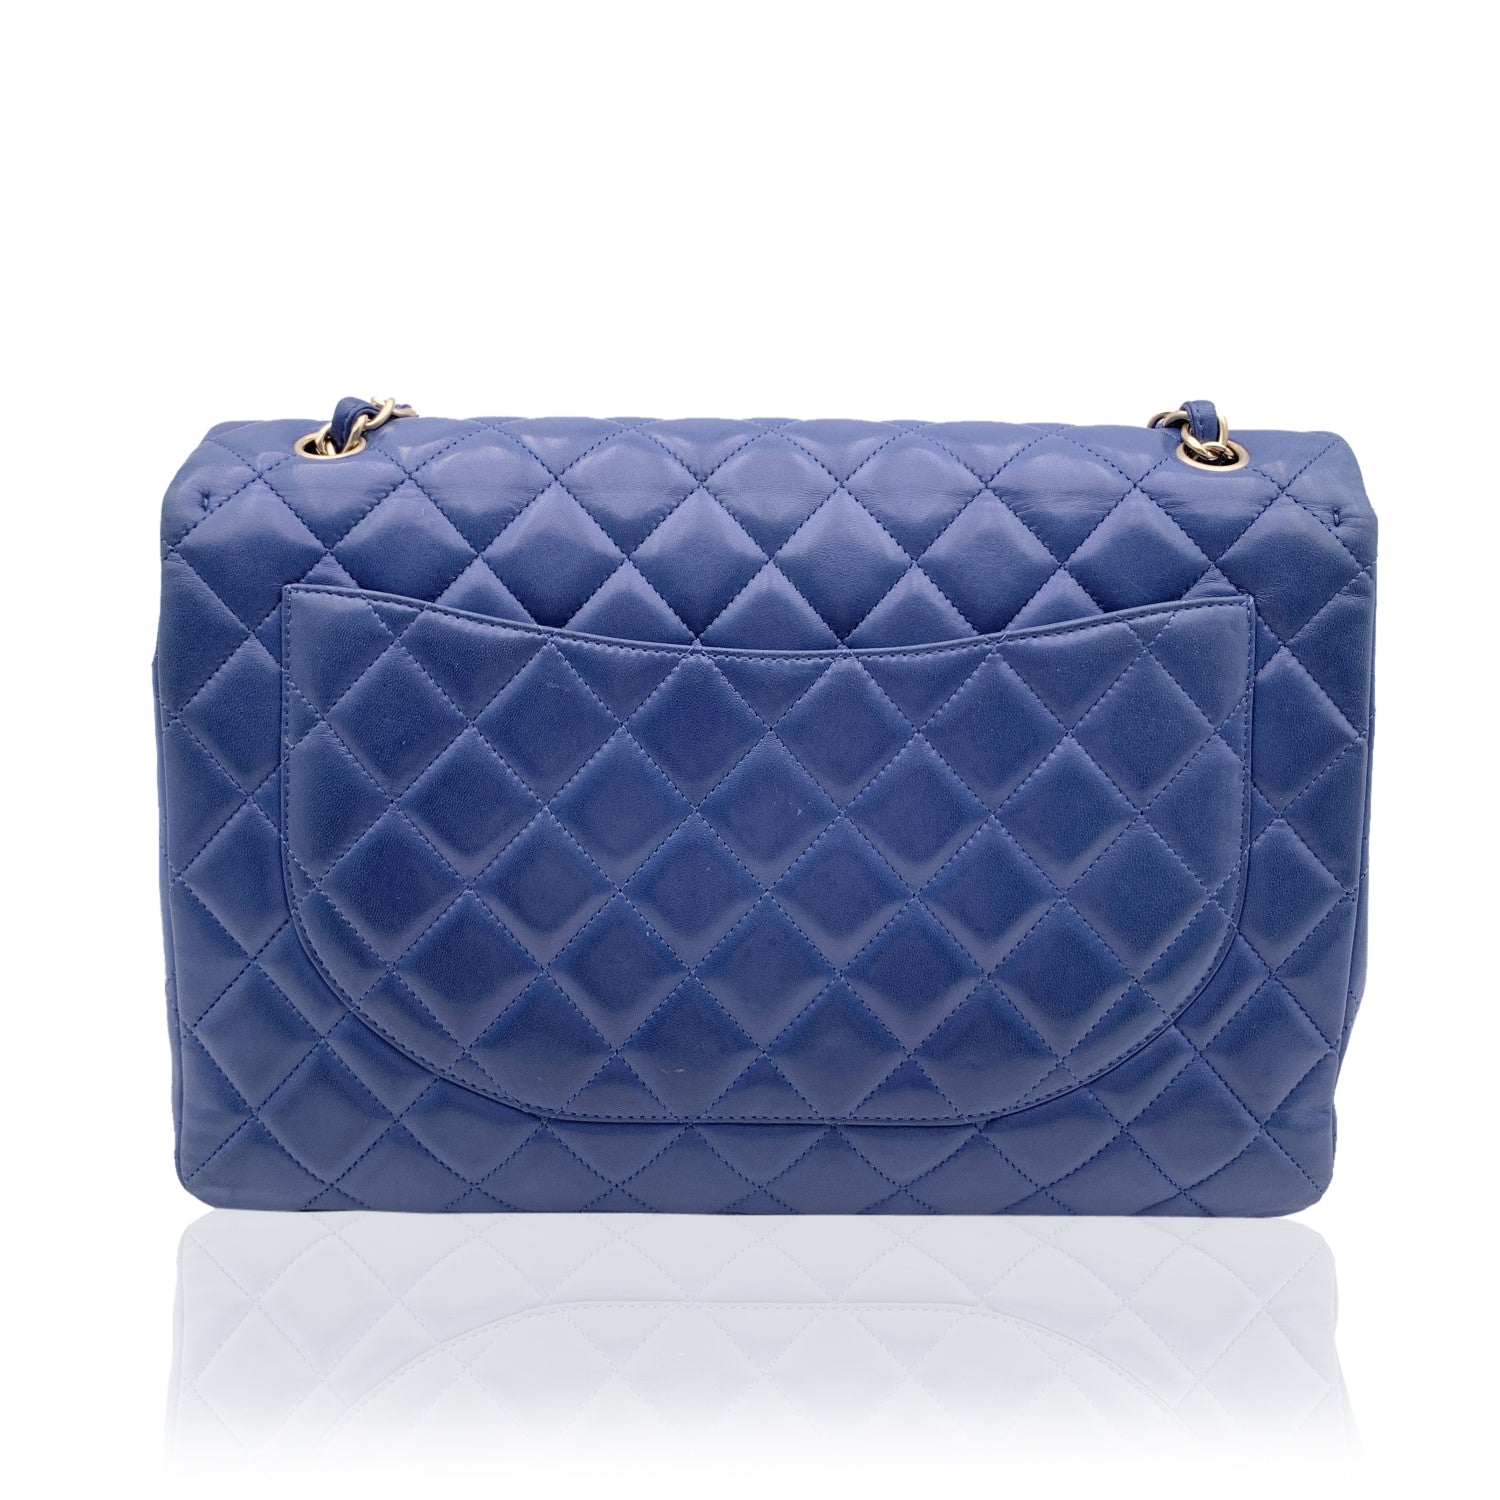 Chanel Navy Blue Quilted Leather CC Chain Around Flap Bag Chanel